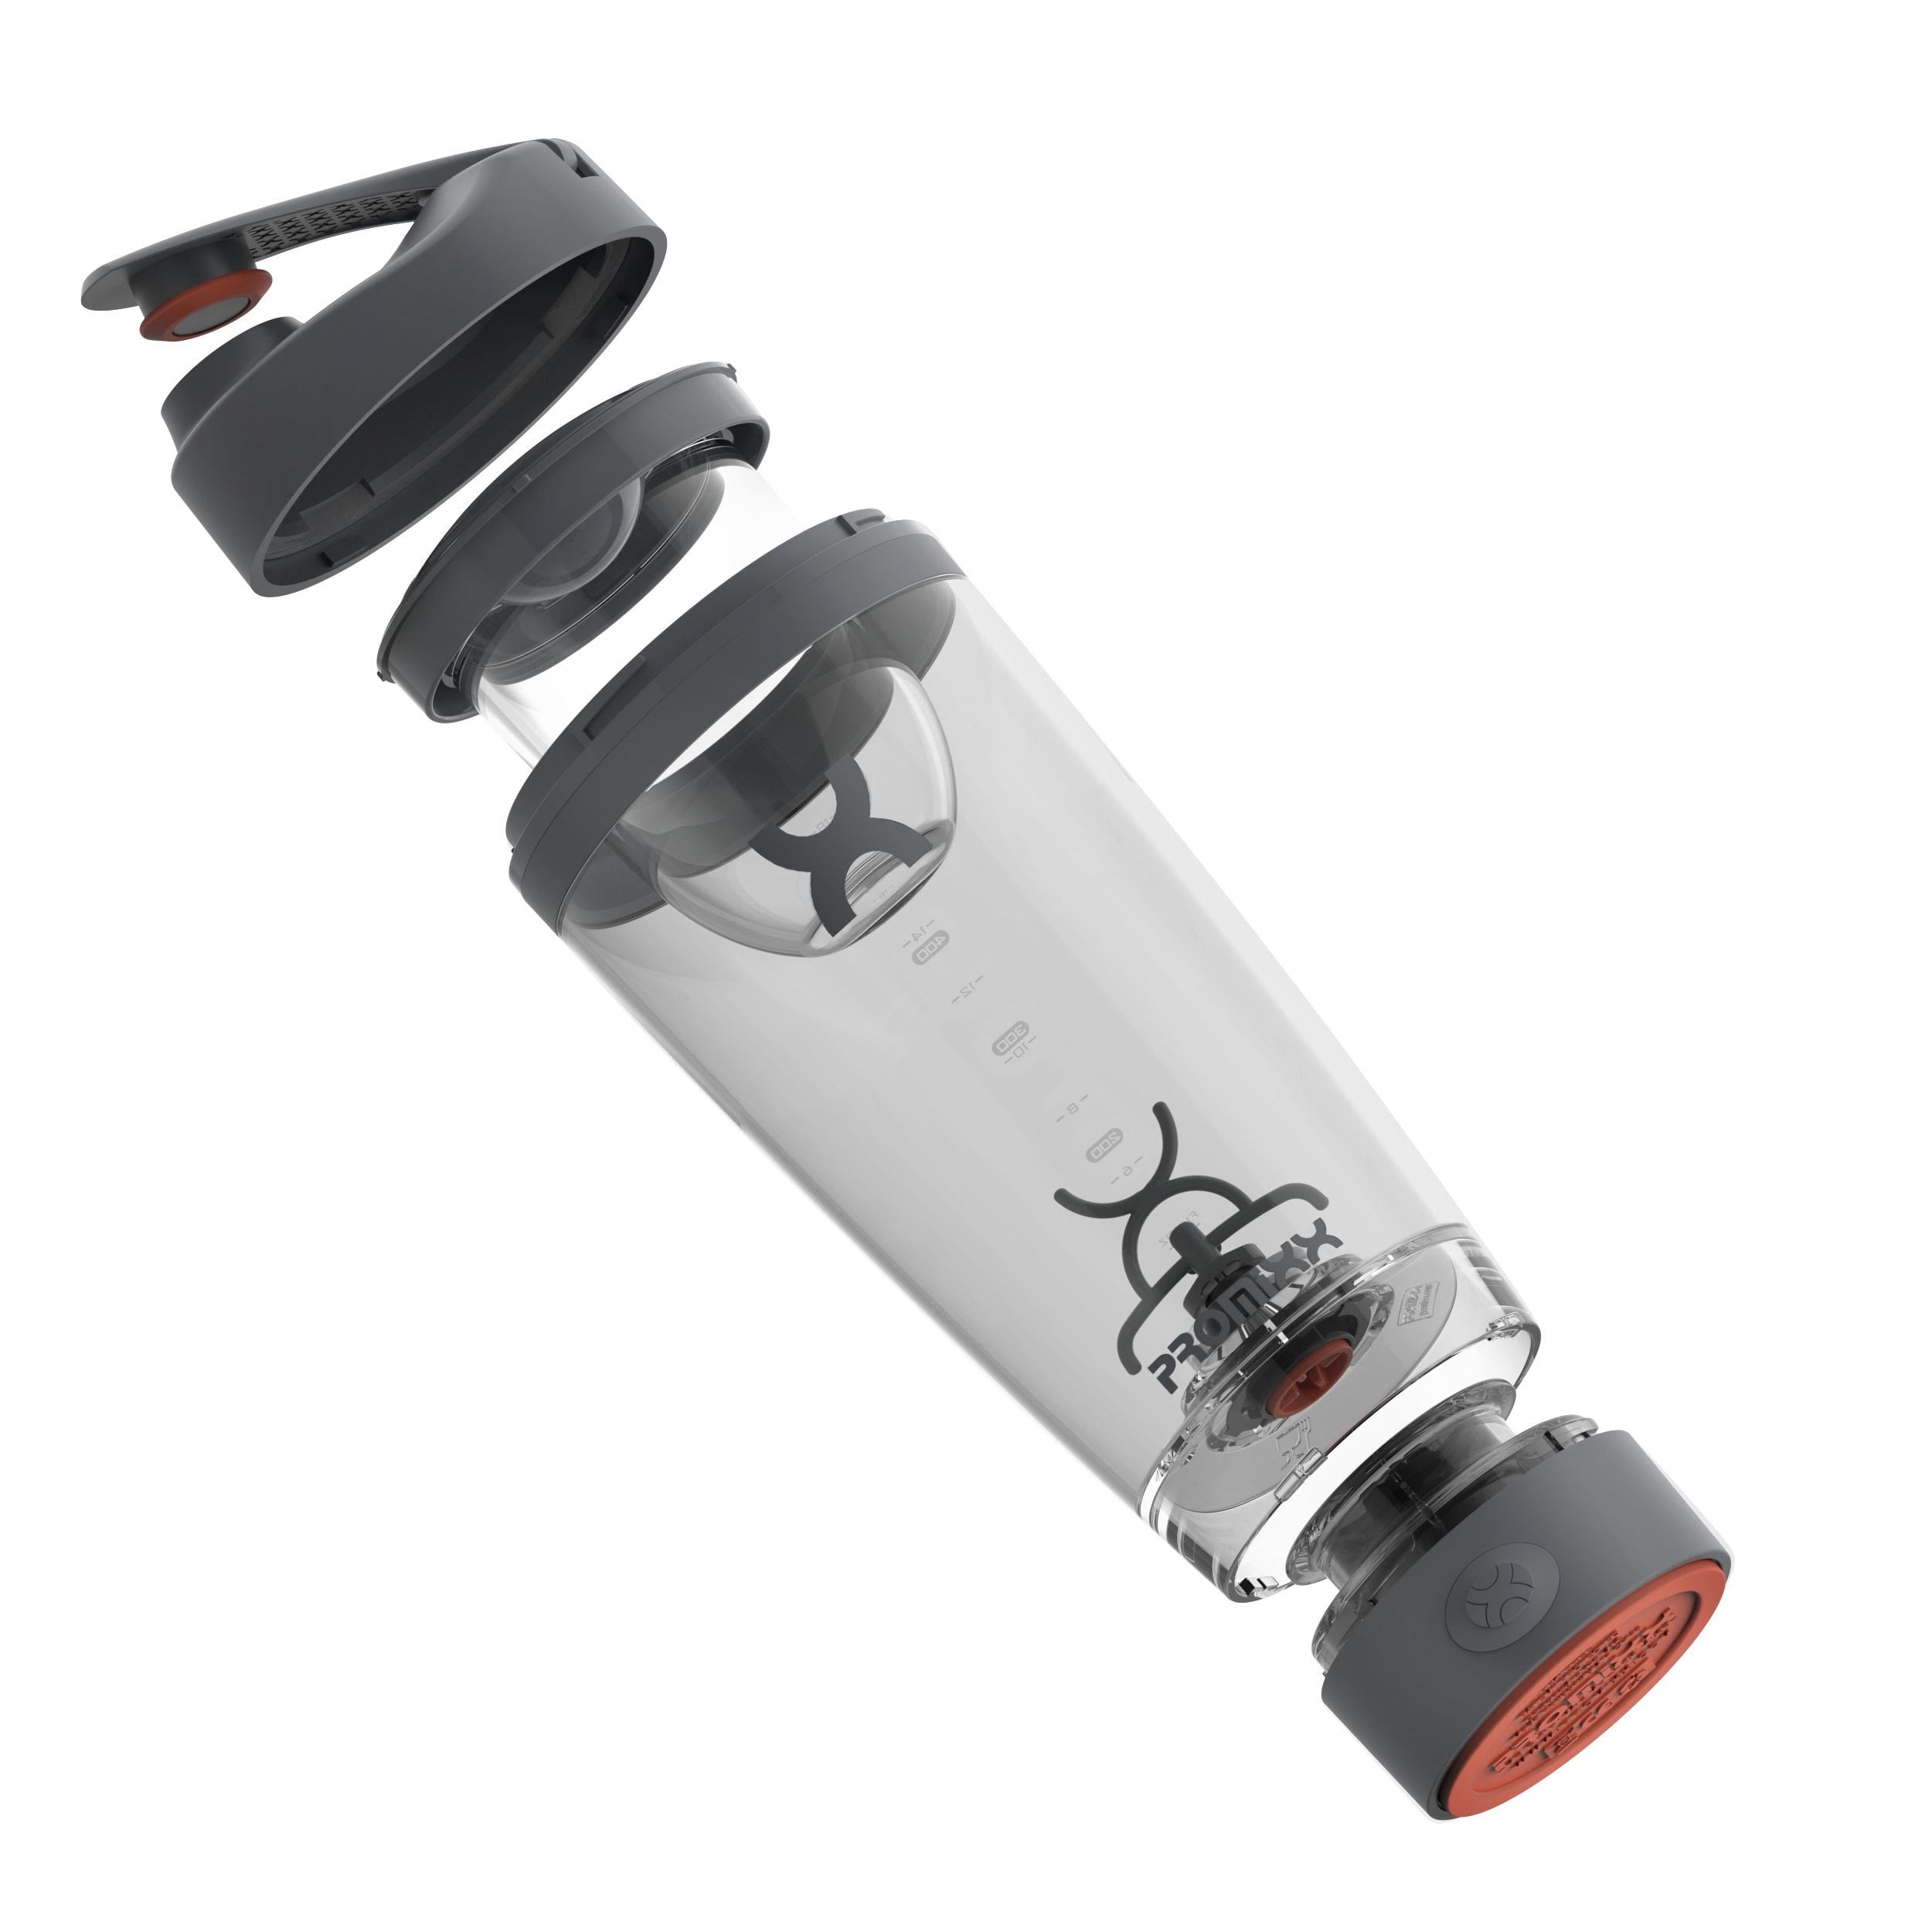 MiiXR AA Electric Shaker Bottle by PROMiXX for Super Smooth